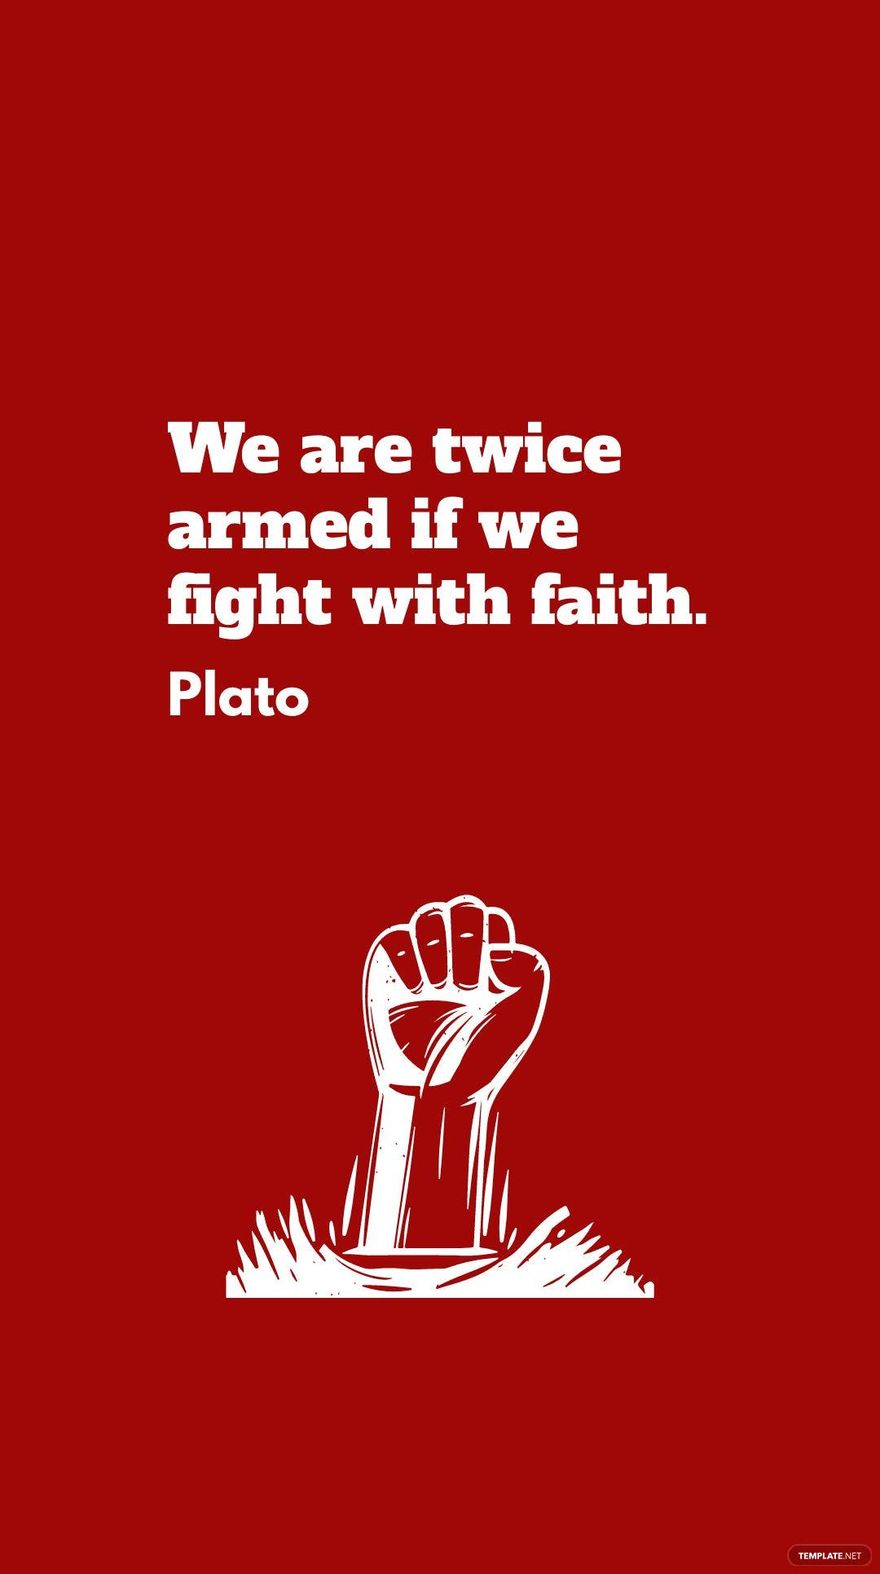 Plato - We are twice armed if we fight with faith. in JPG